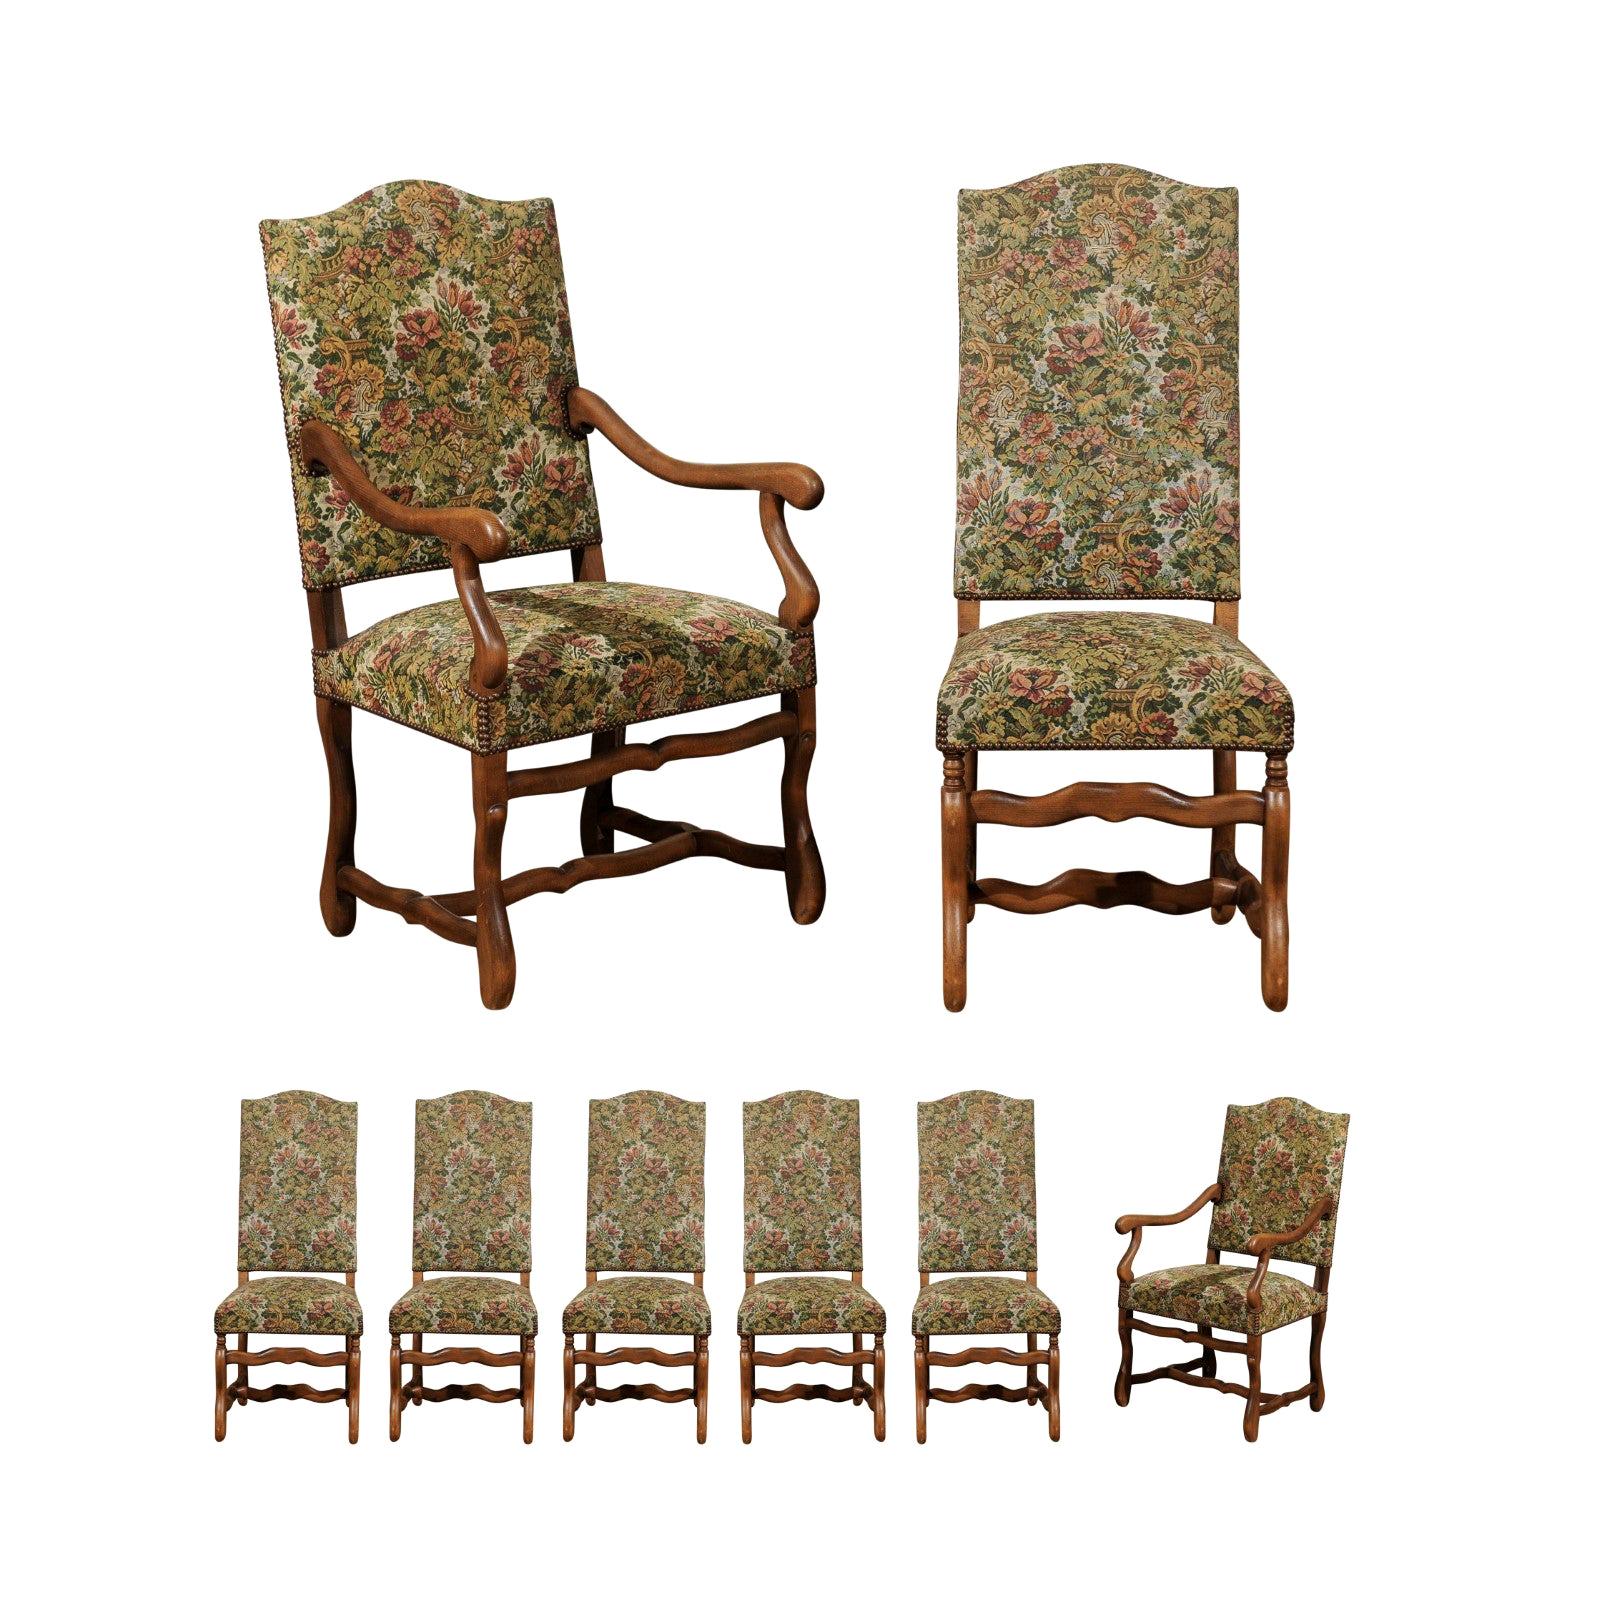 Set of Eight French Louis XIII Style Os de Mouton Dining Chairs with Upholstery